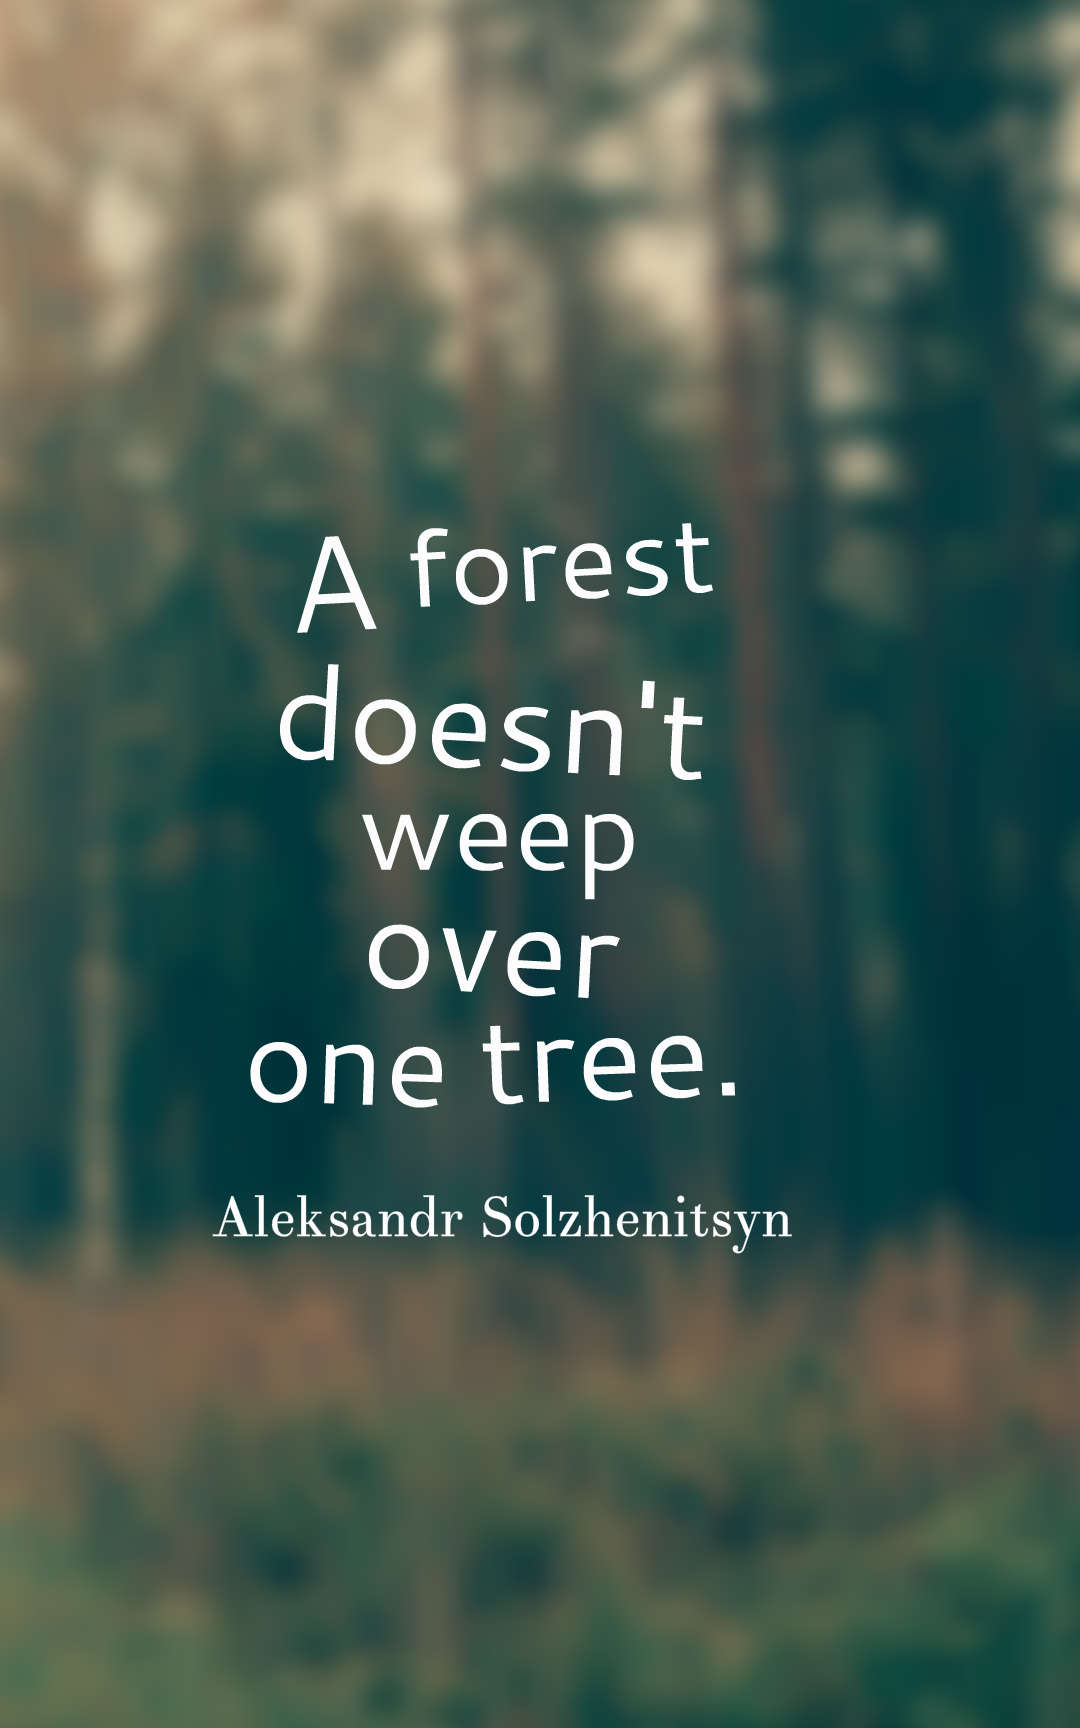 A forest doesn't weep over one tree.